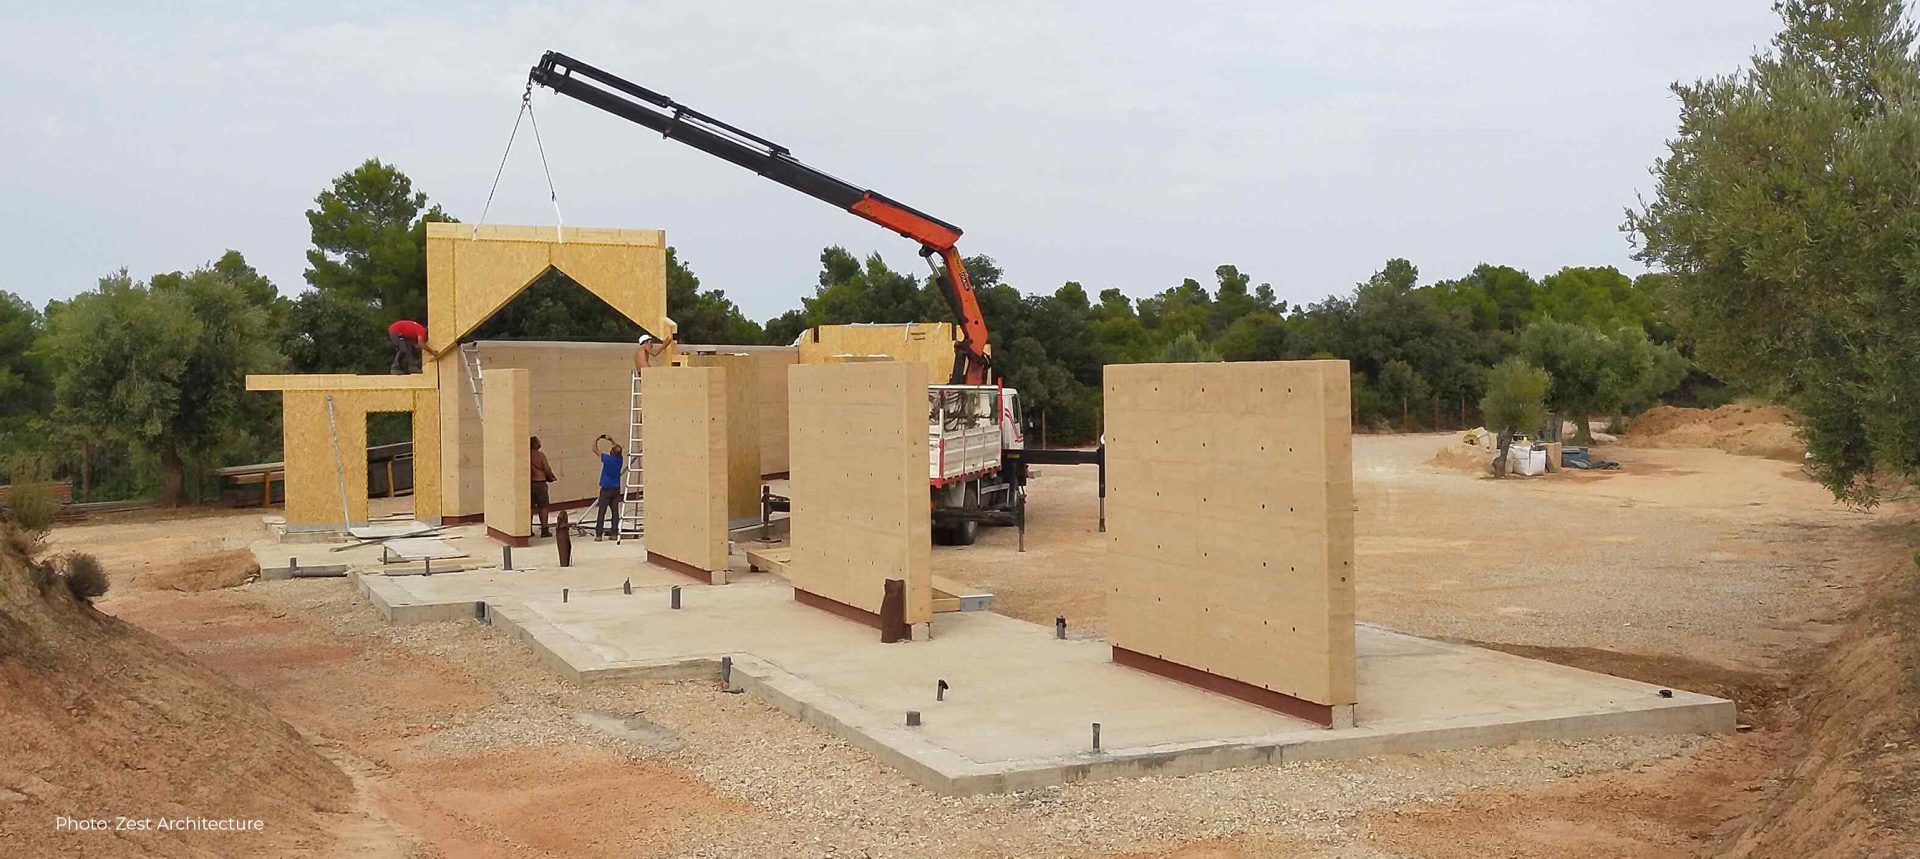 use-of-prefabricated-constructions-rammed-earth-construction-zest-architecture-spain